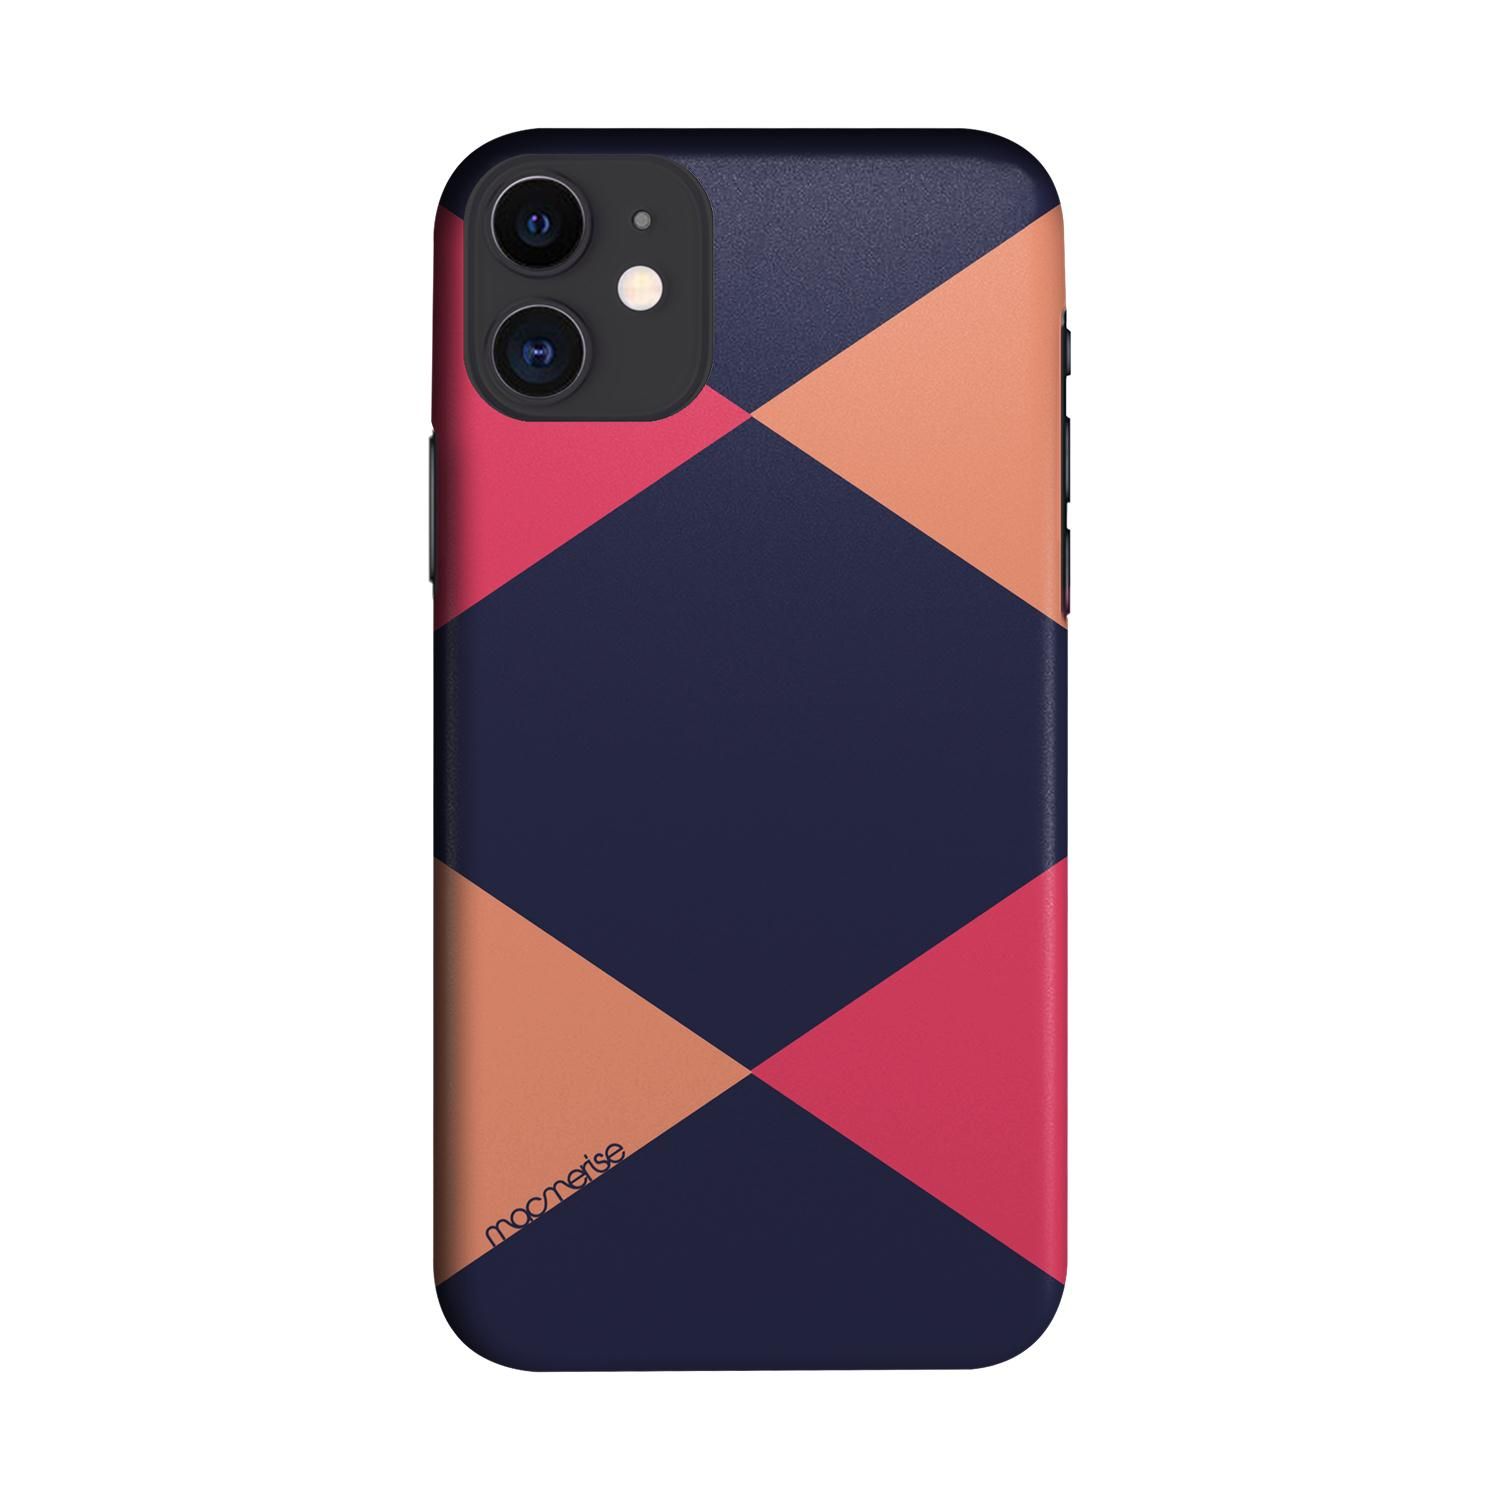 Buy Criss Cross Blupink - Sleek Phone Case for iPhone 11 Online